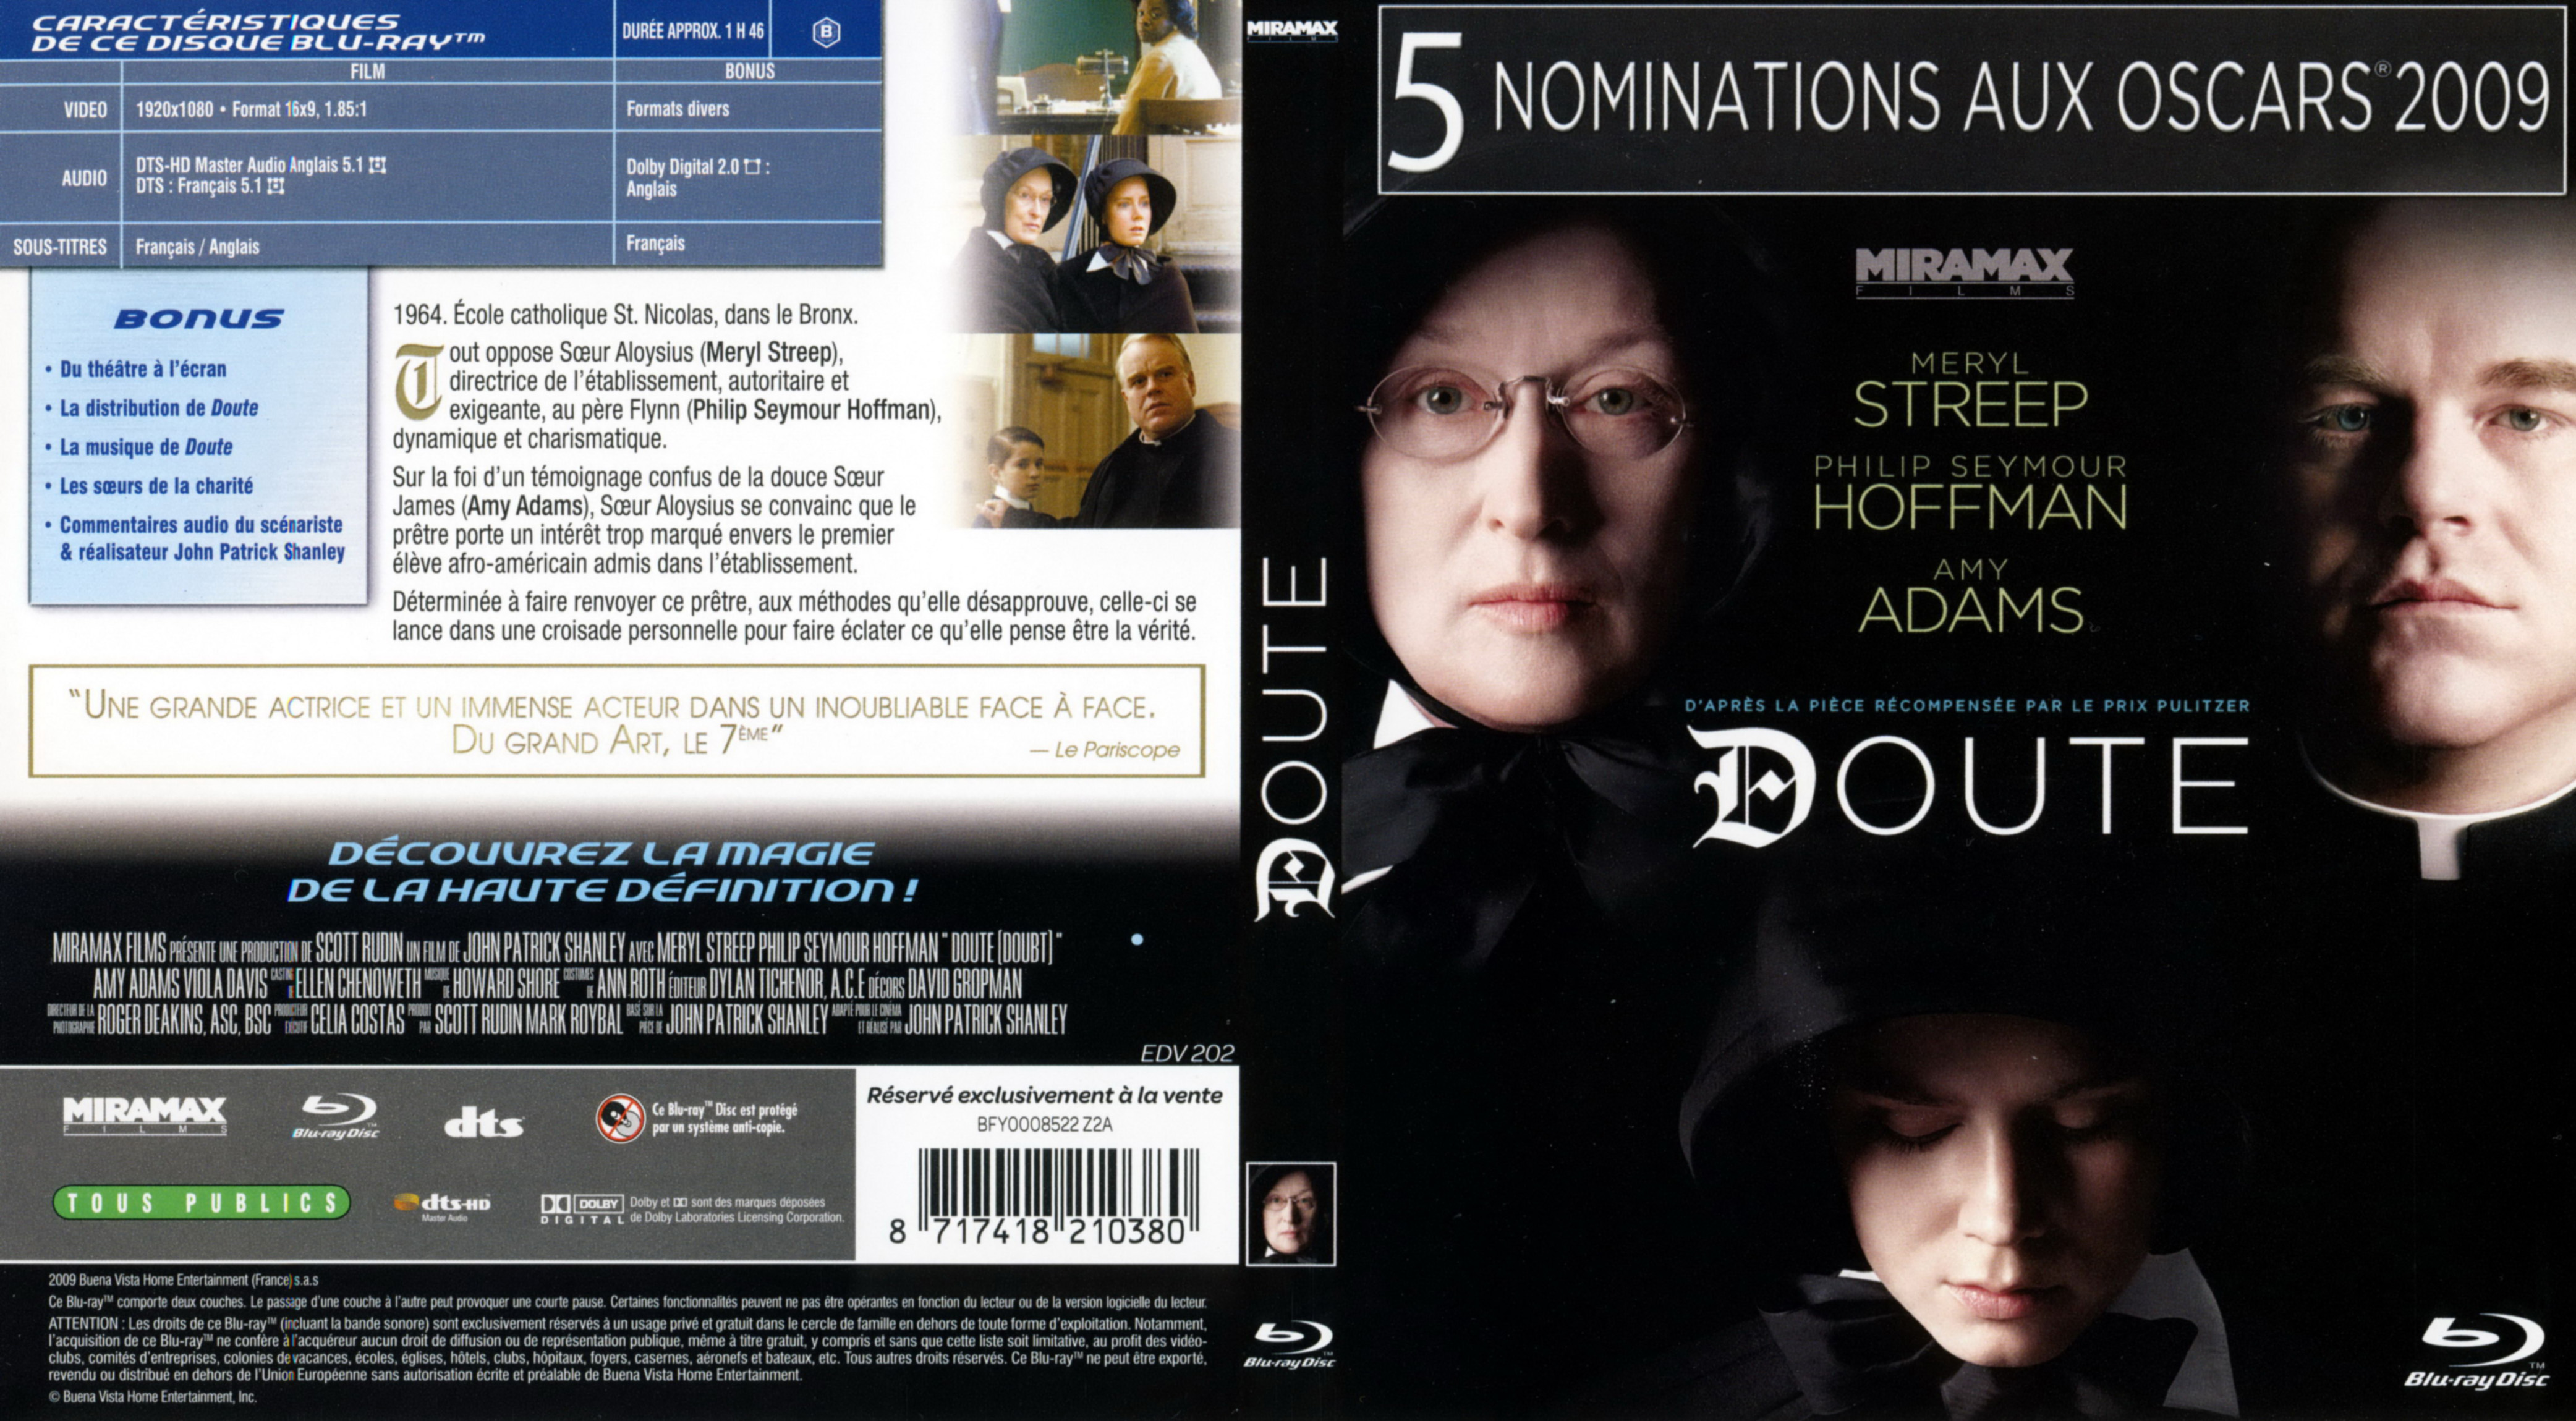 Jaquette DVD Doute (BLU-RAY)